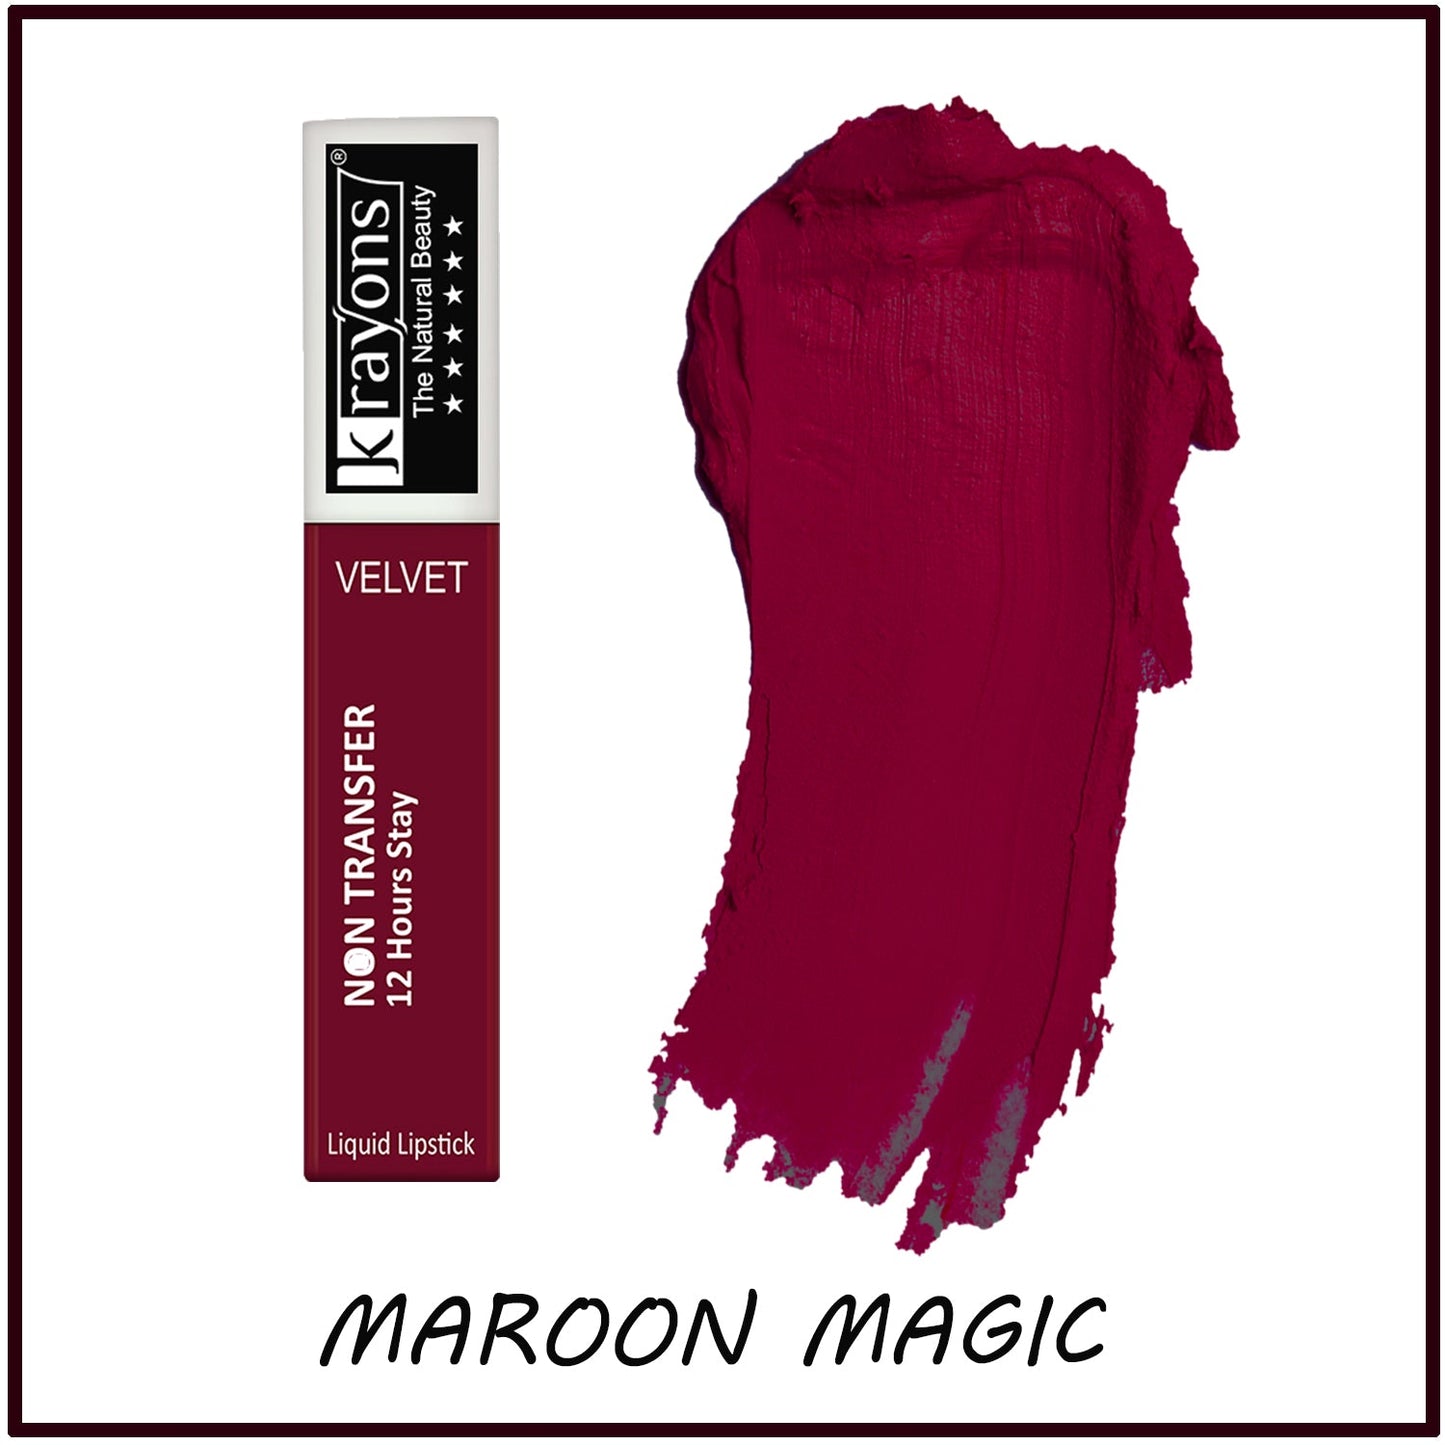 Krayons Power Stay Nontransfer 12hrs Stay Matte Liquid Lipstick, Mask Proof, 4ml Each, Combo, Pack of 3 (Maroon Magic, Pink Glam, Red Rush)